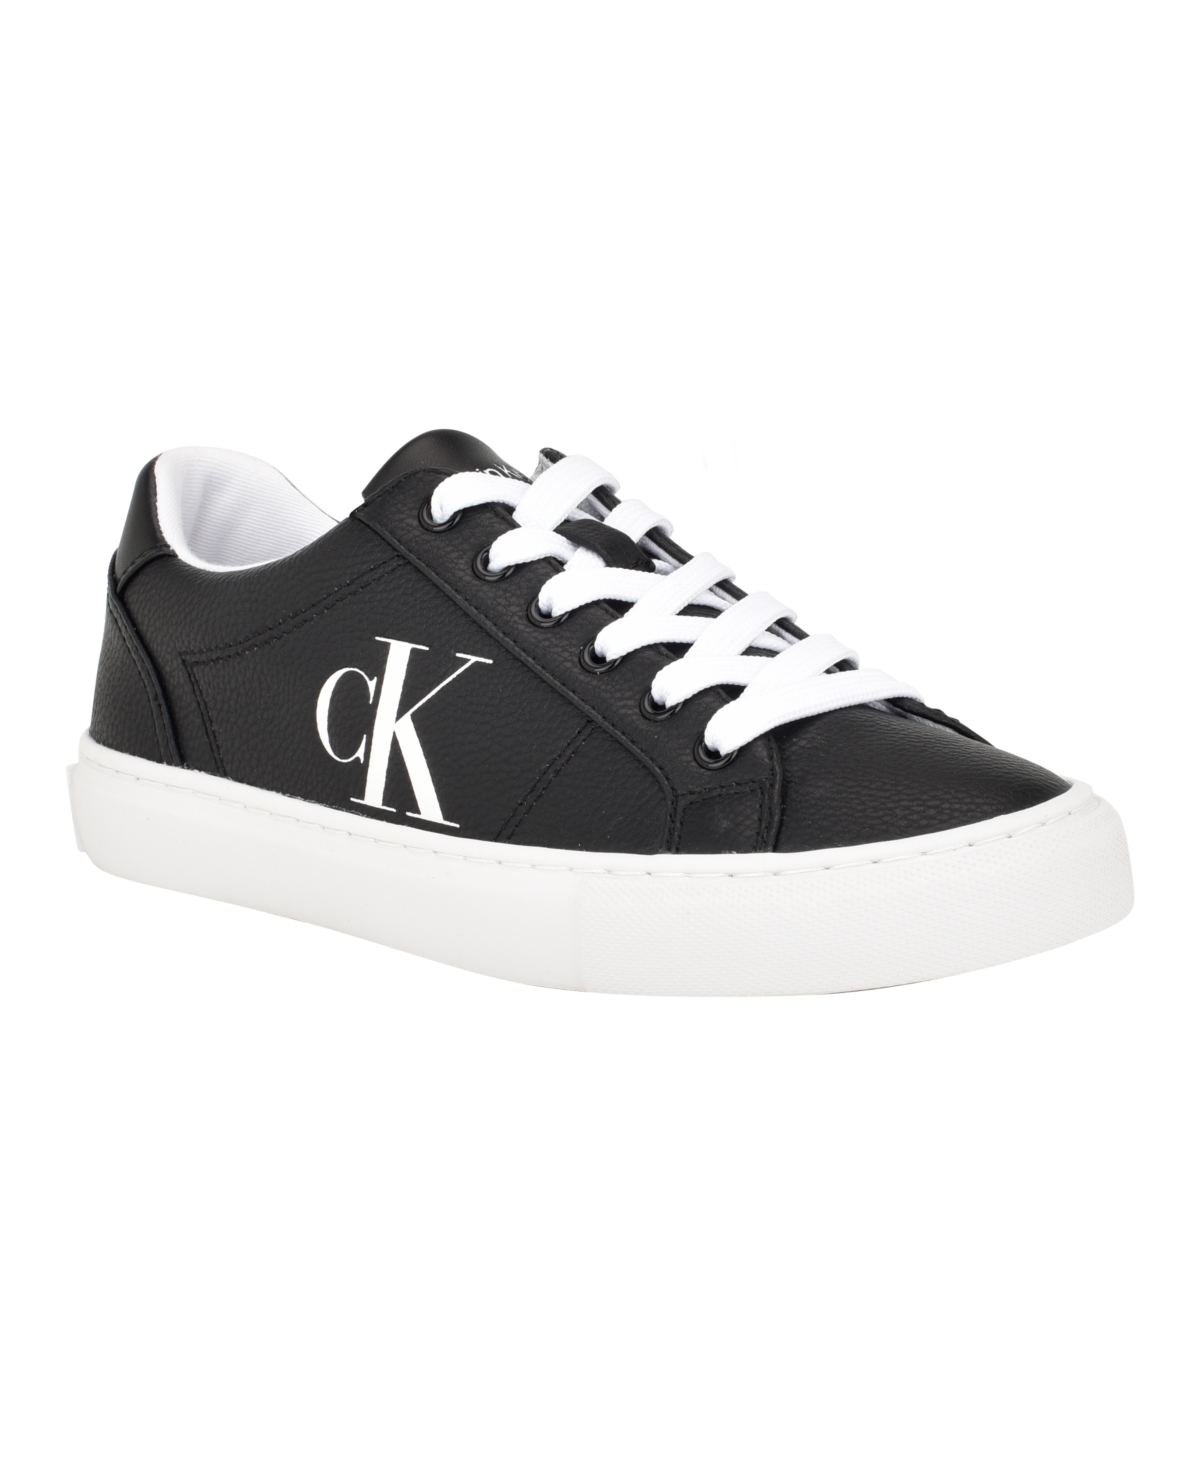 CALVIN KLEIN WOMEN'S CELBI LACE-UP ROUND TOE CASUAL SNEAKERS